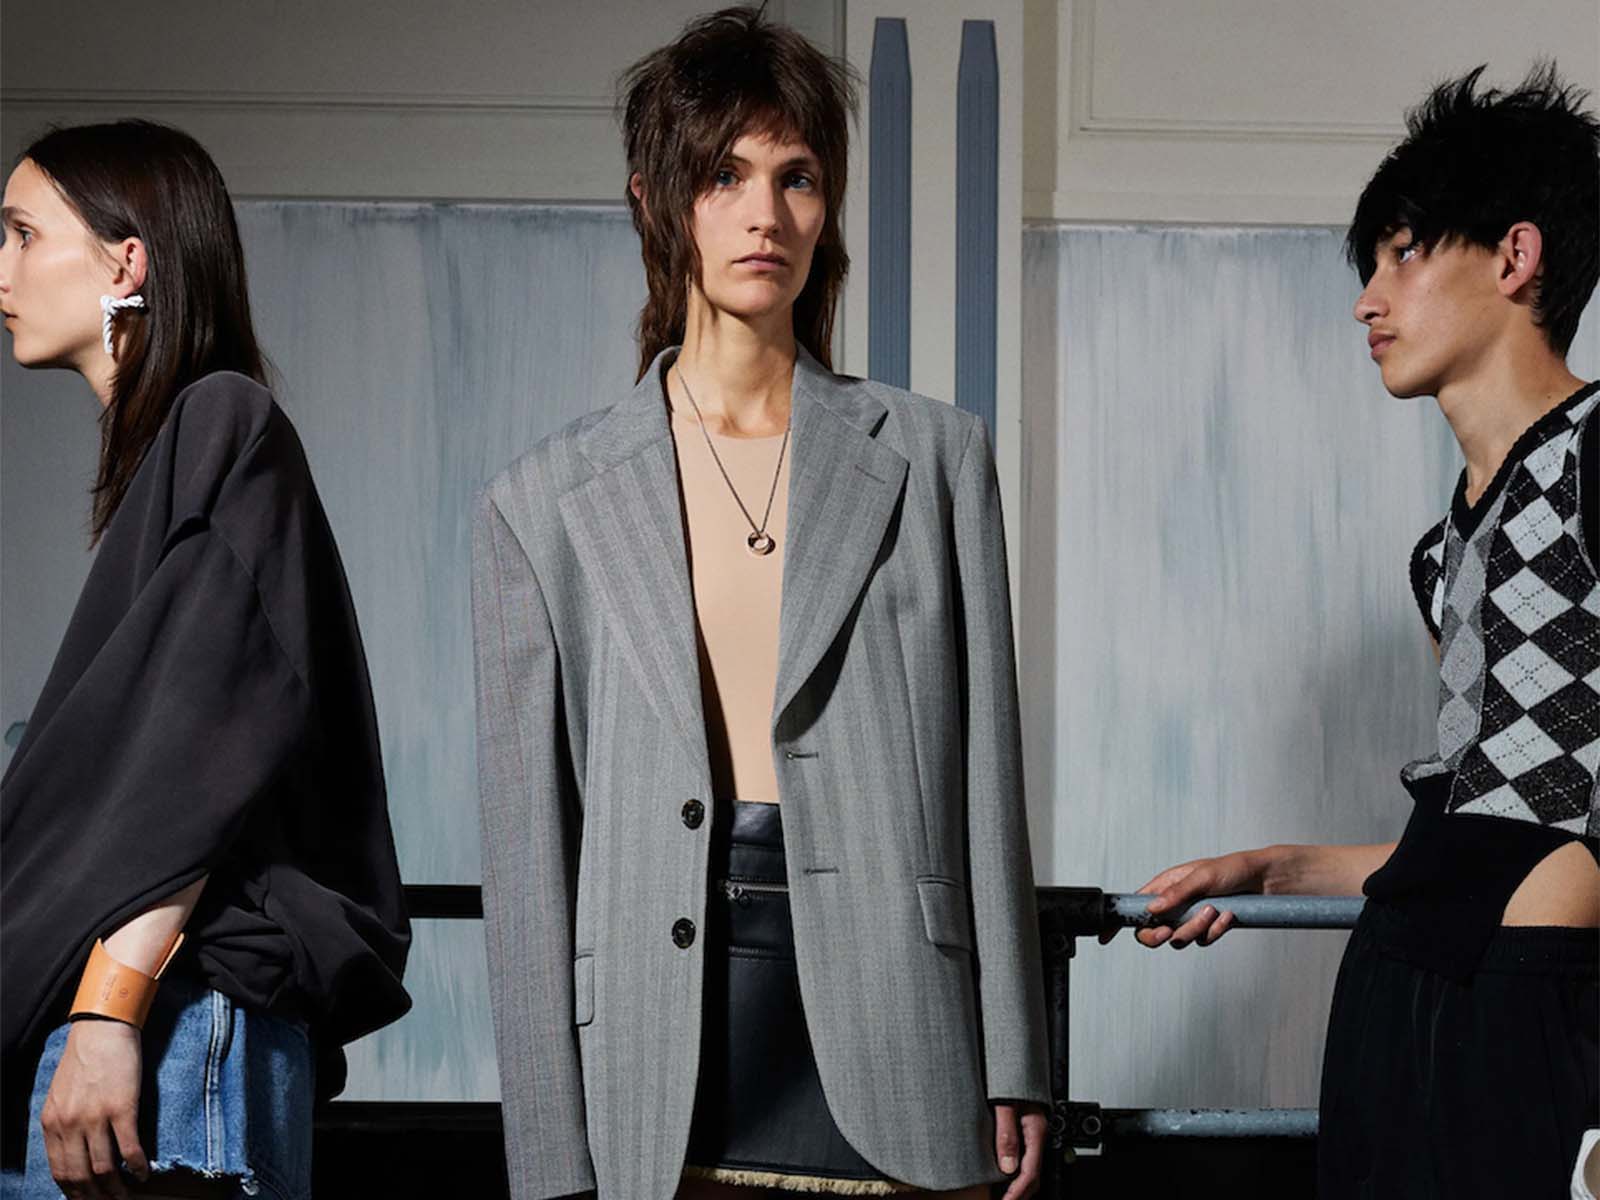 MM6 Maison Margiela’s resort 23 ranges from tailoring to athleisure